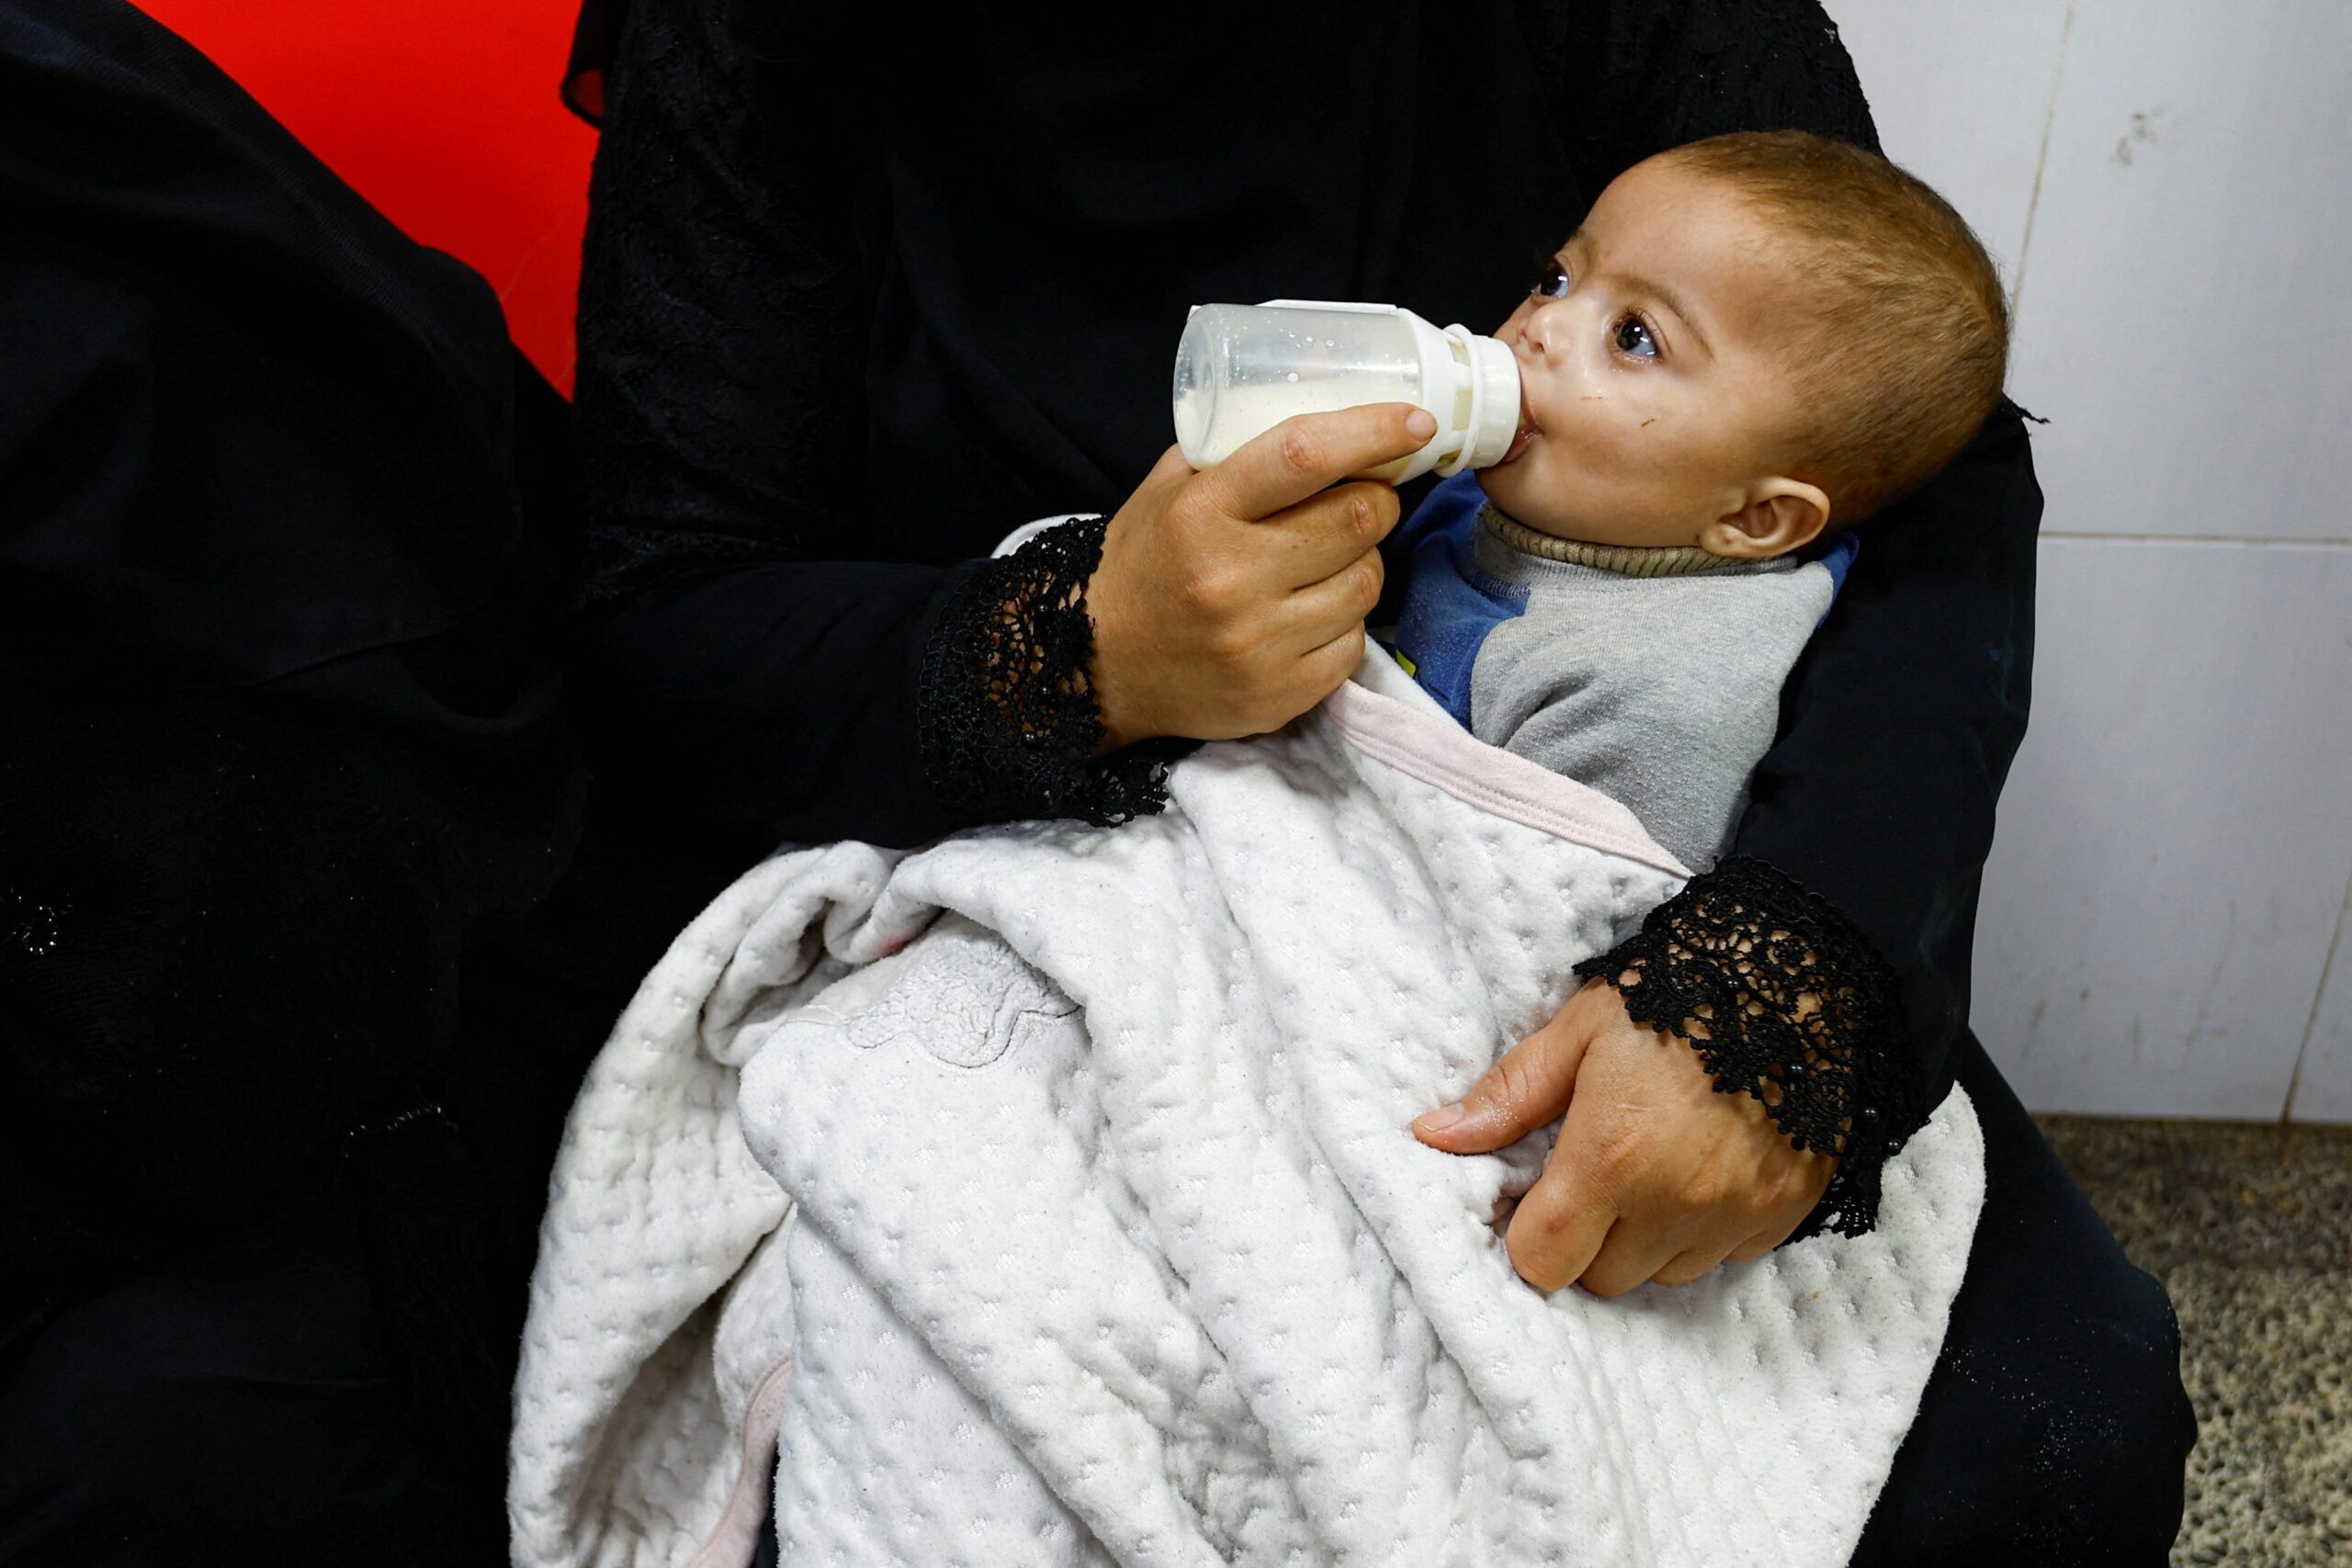 Gaza suffers famine-level shortages, with mass death imminent – UN-backed monitor